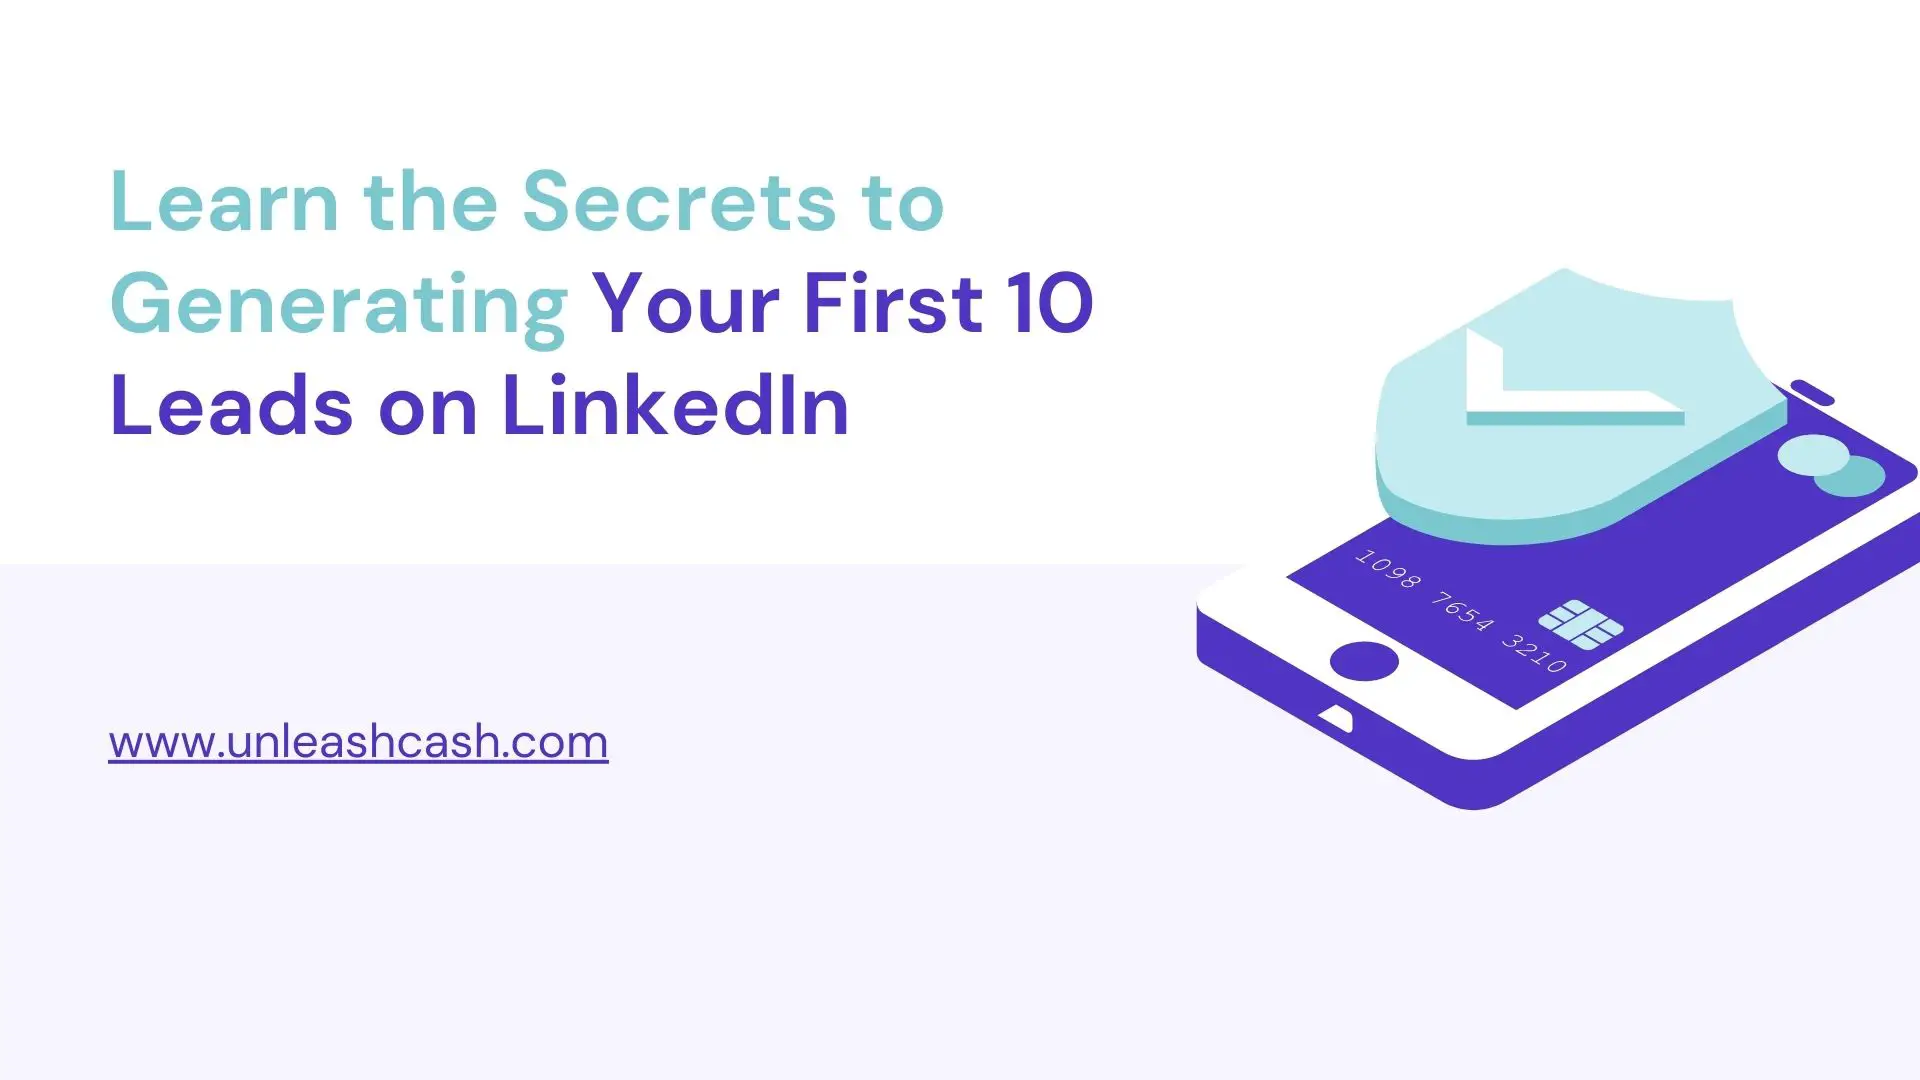 Learn the Secrets to Generating Your First 10 Leads on LinkedIn